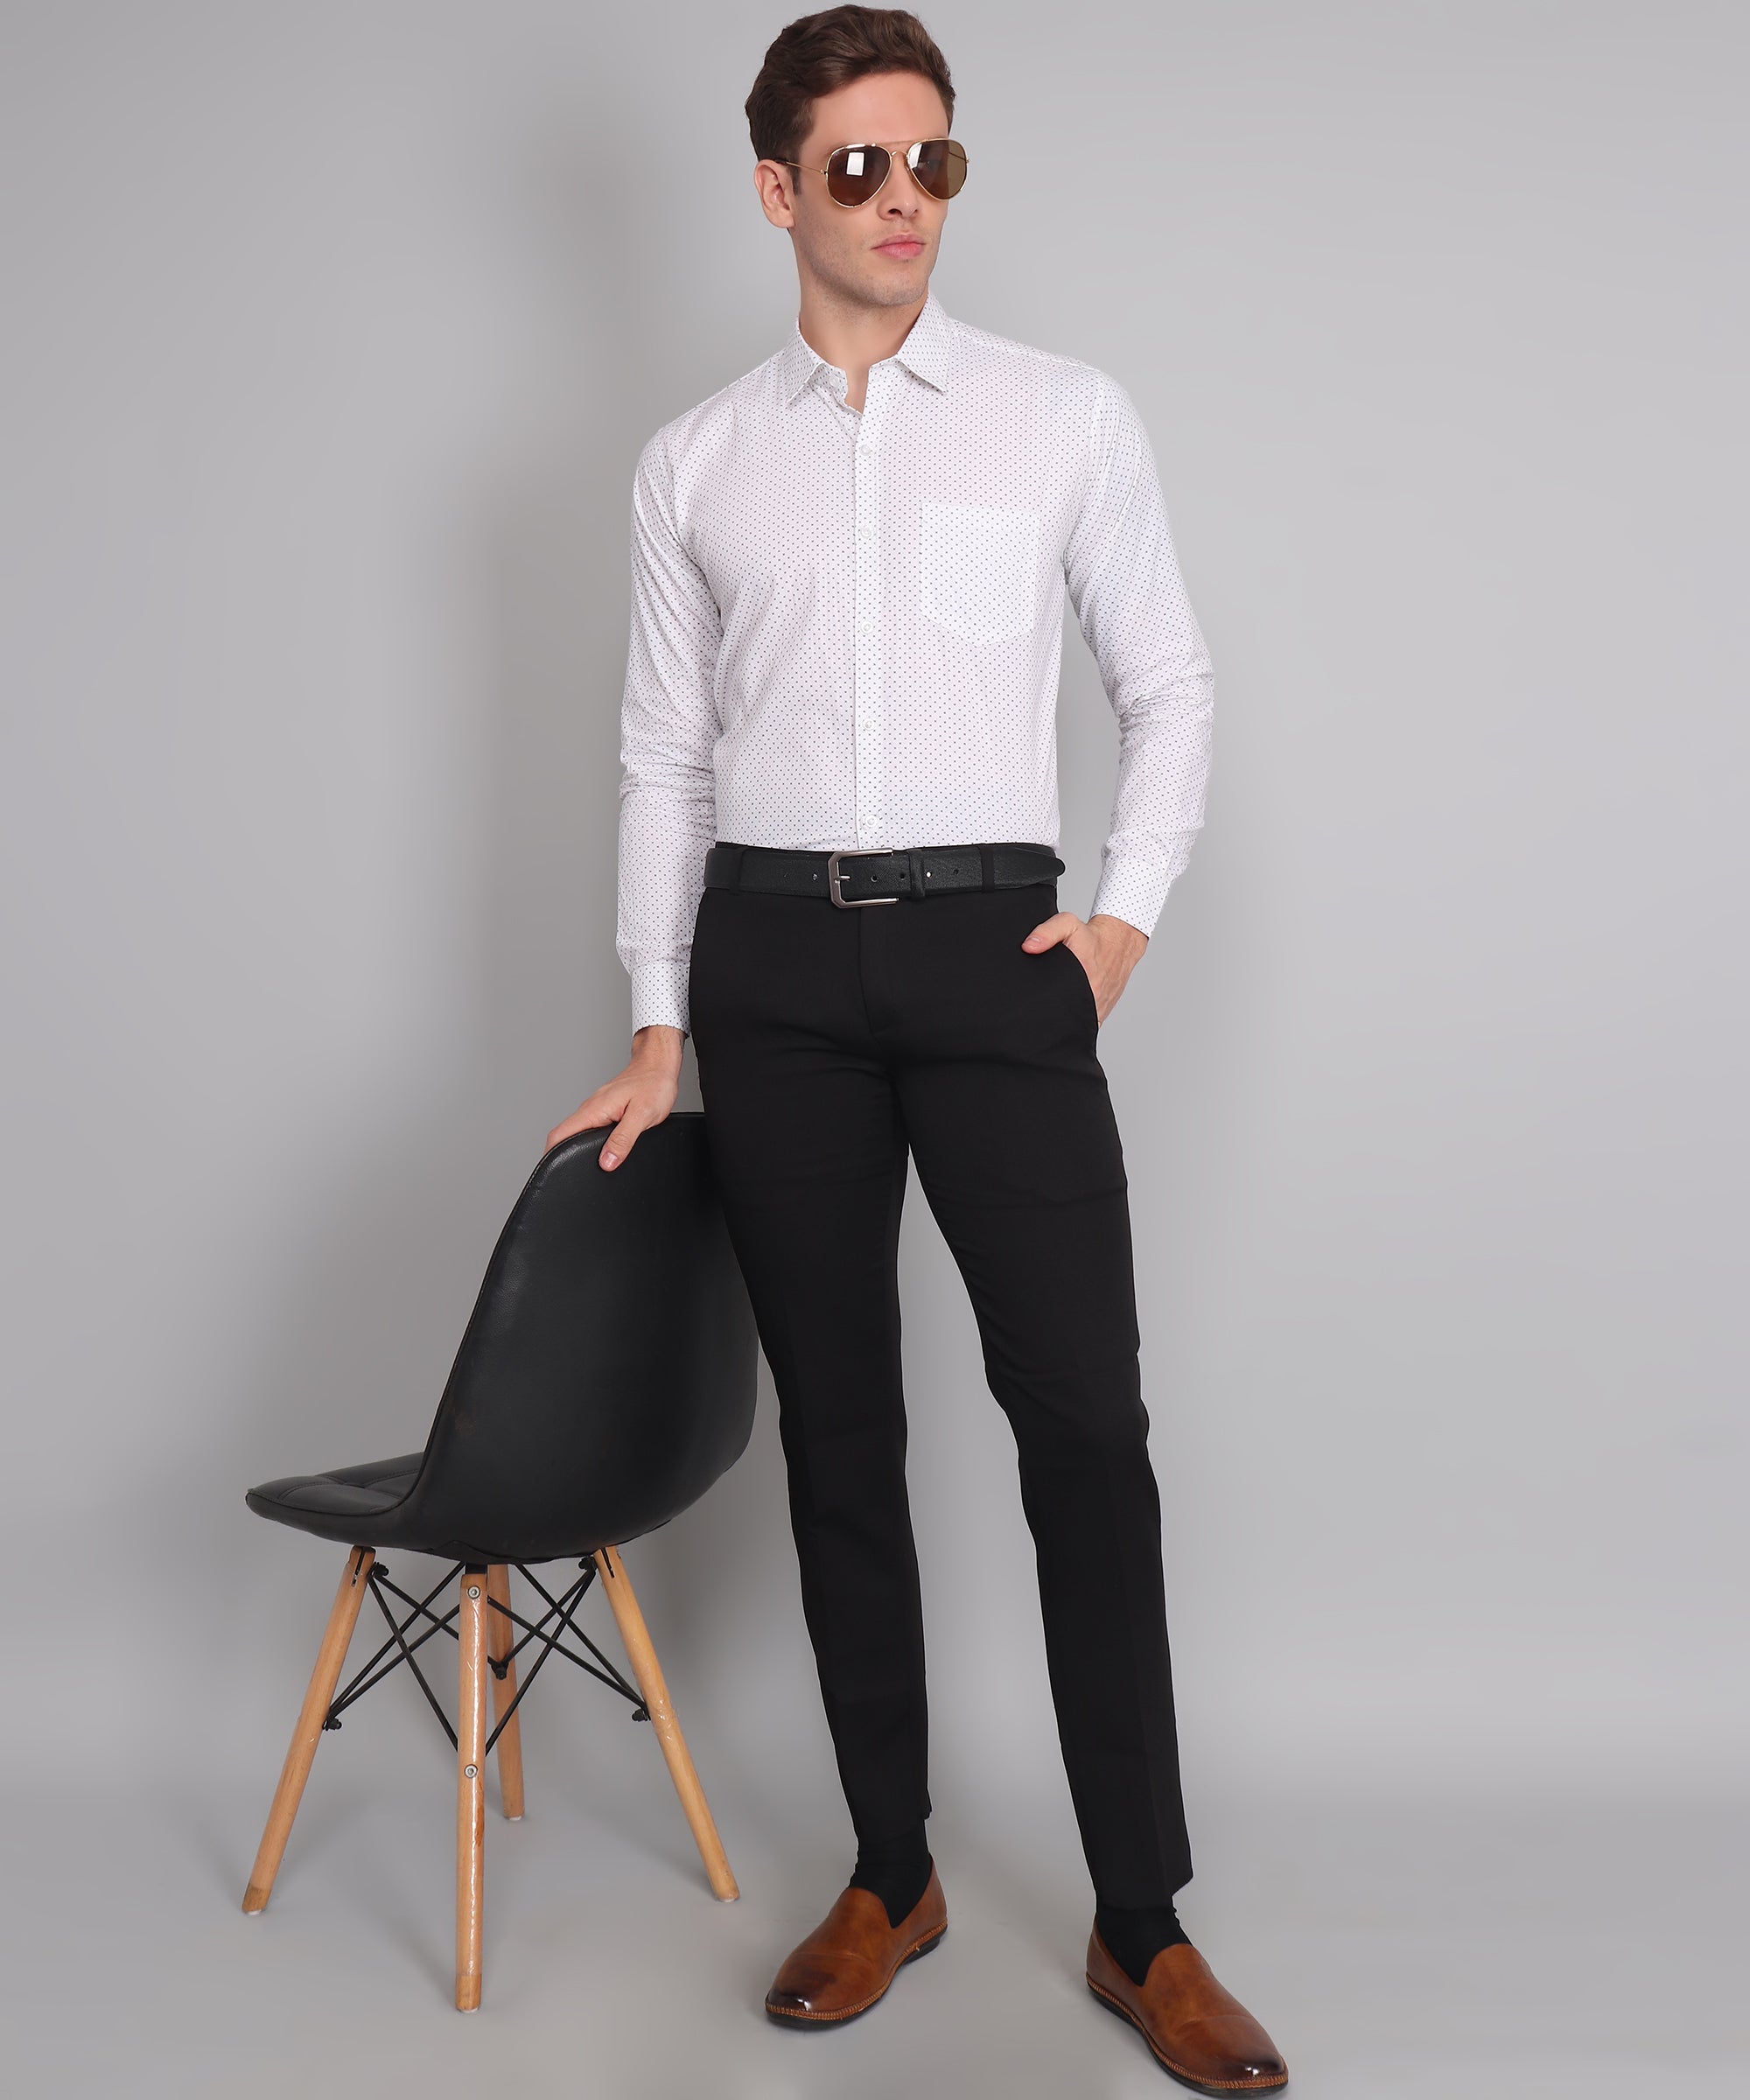 Cool Comfort: Embracing Effortless Style with Pure Linen Fabric Shirts